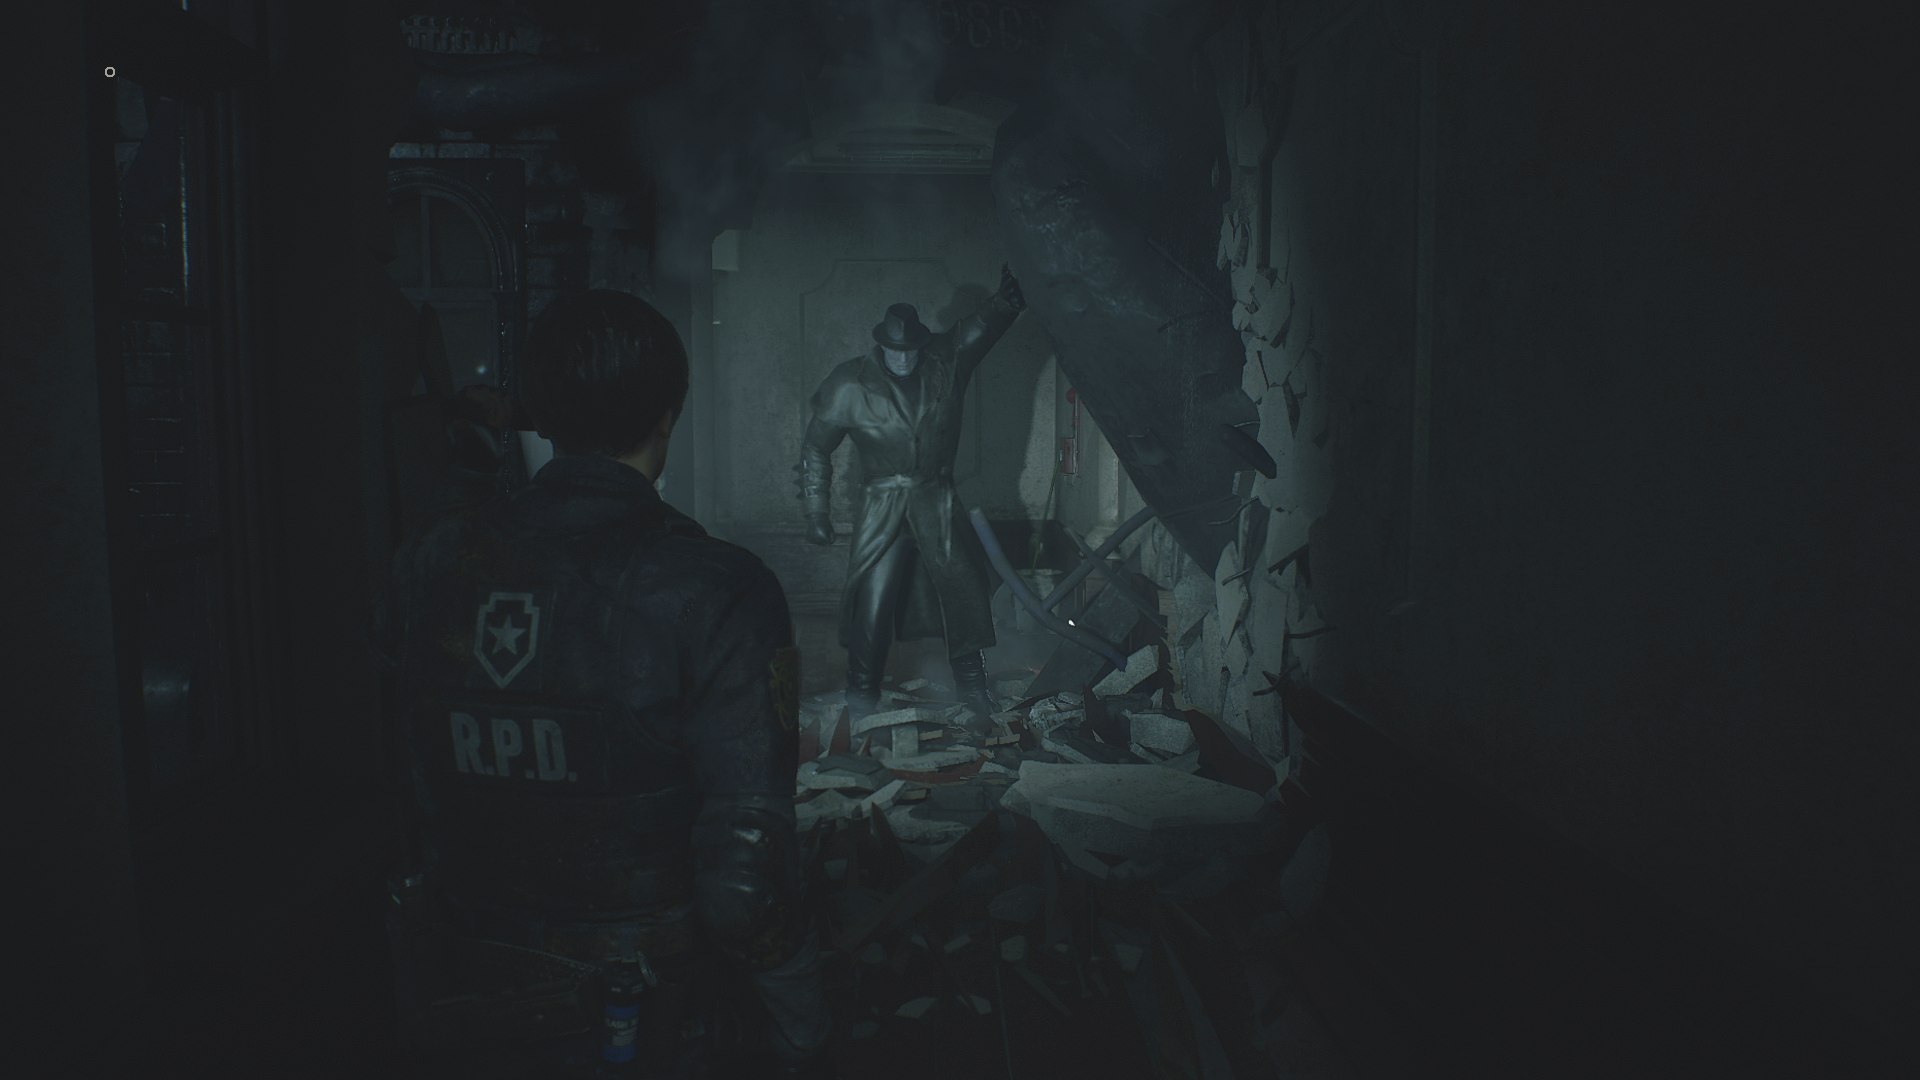 Mr X has some scary mods in Resident Evil 2 Remake